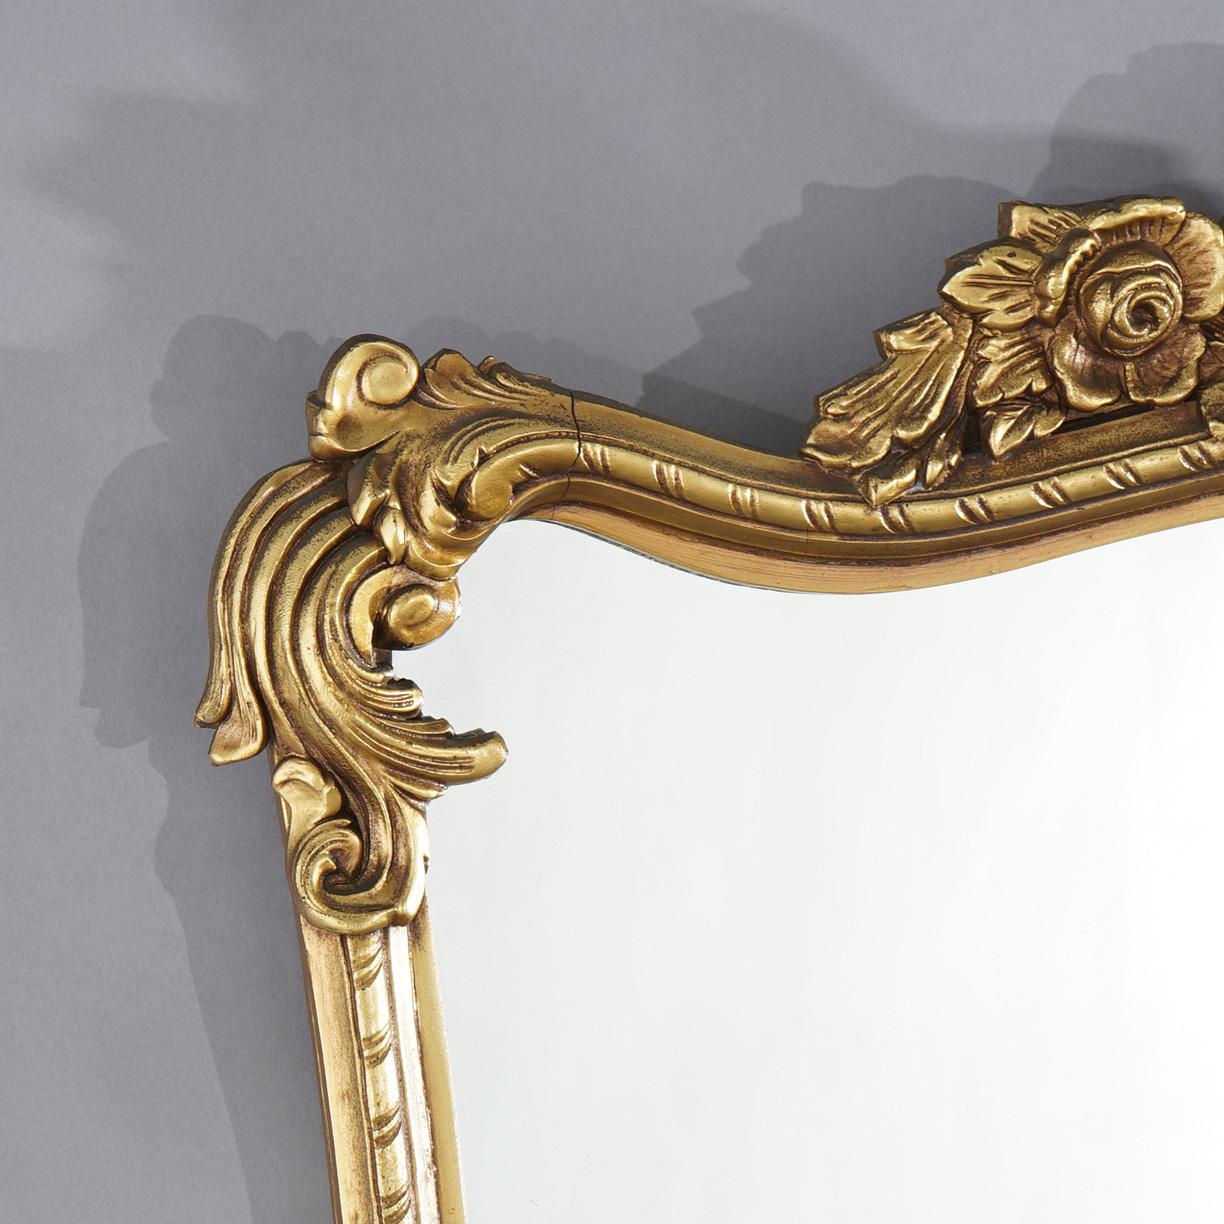 Antique French Giltwood Wall Mirror with Foliate & Gadroon Elements Circa 1930 In Good Condition For Sale In Big Flats, NY